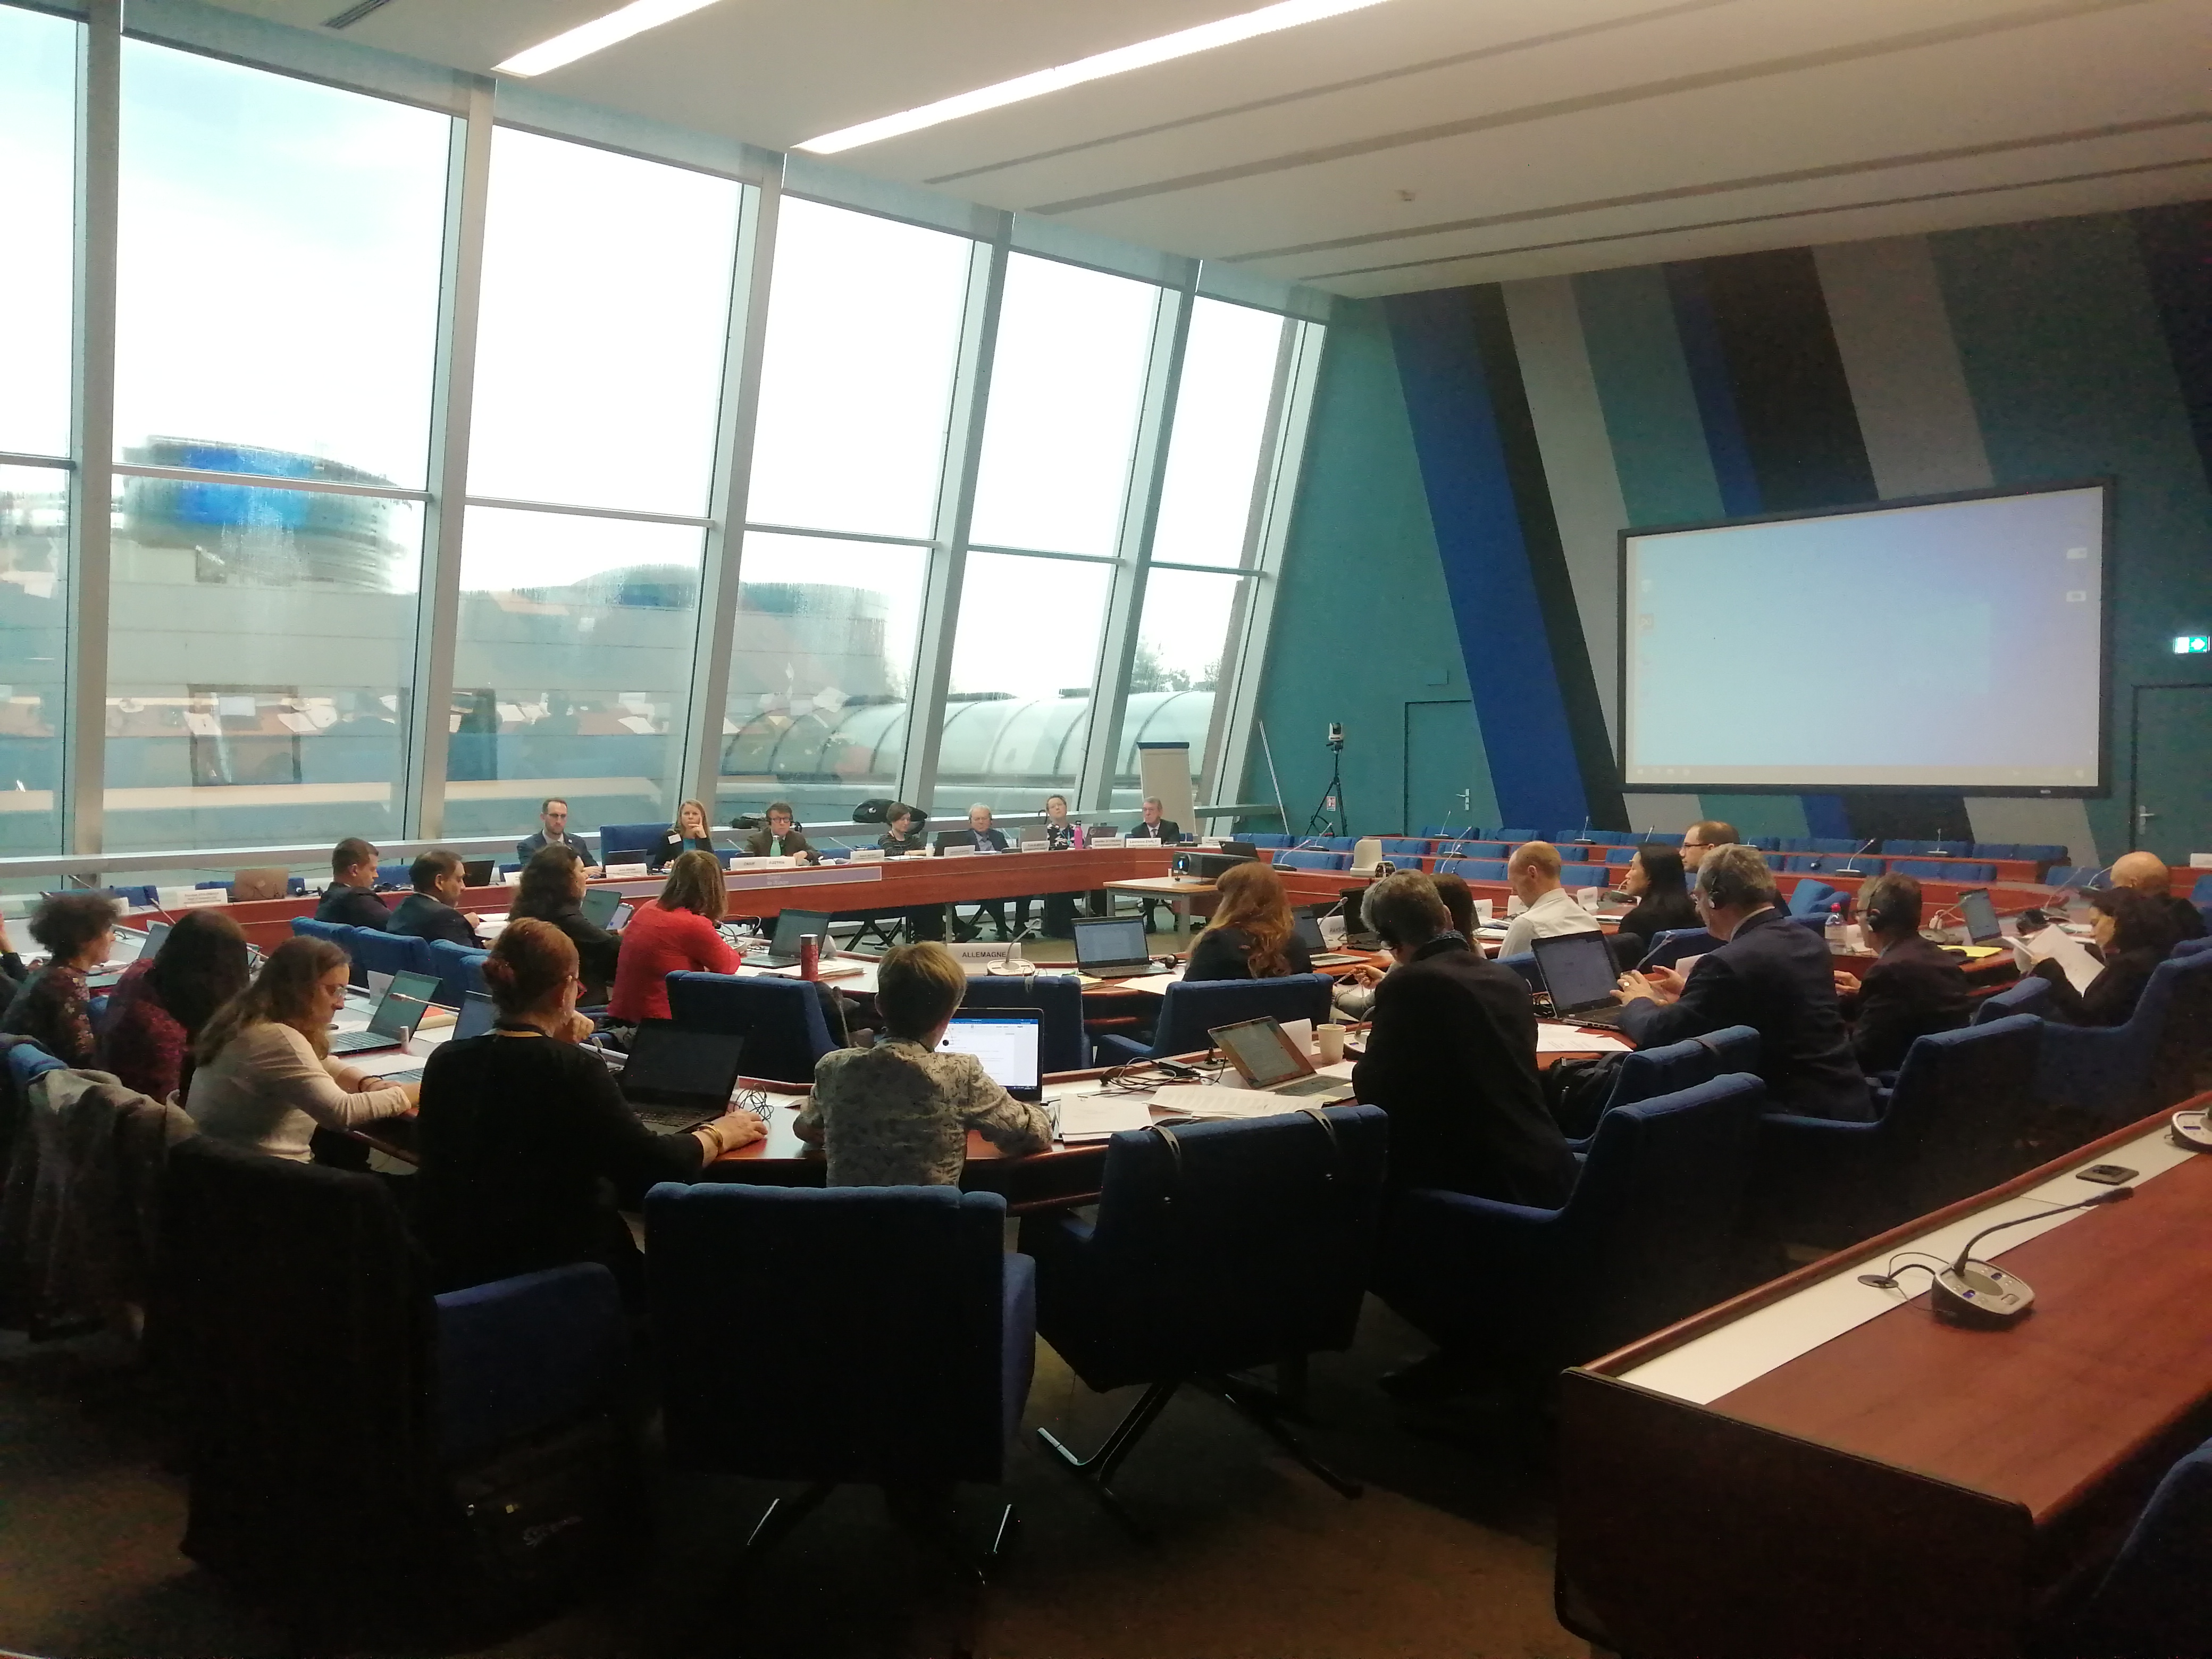 3rd meeting of PC/ADI-CH takes place in Strasbourg